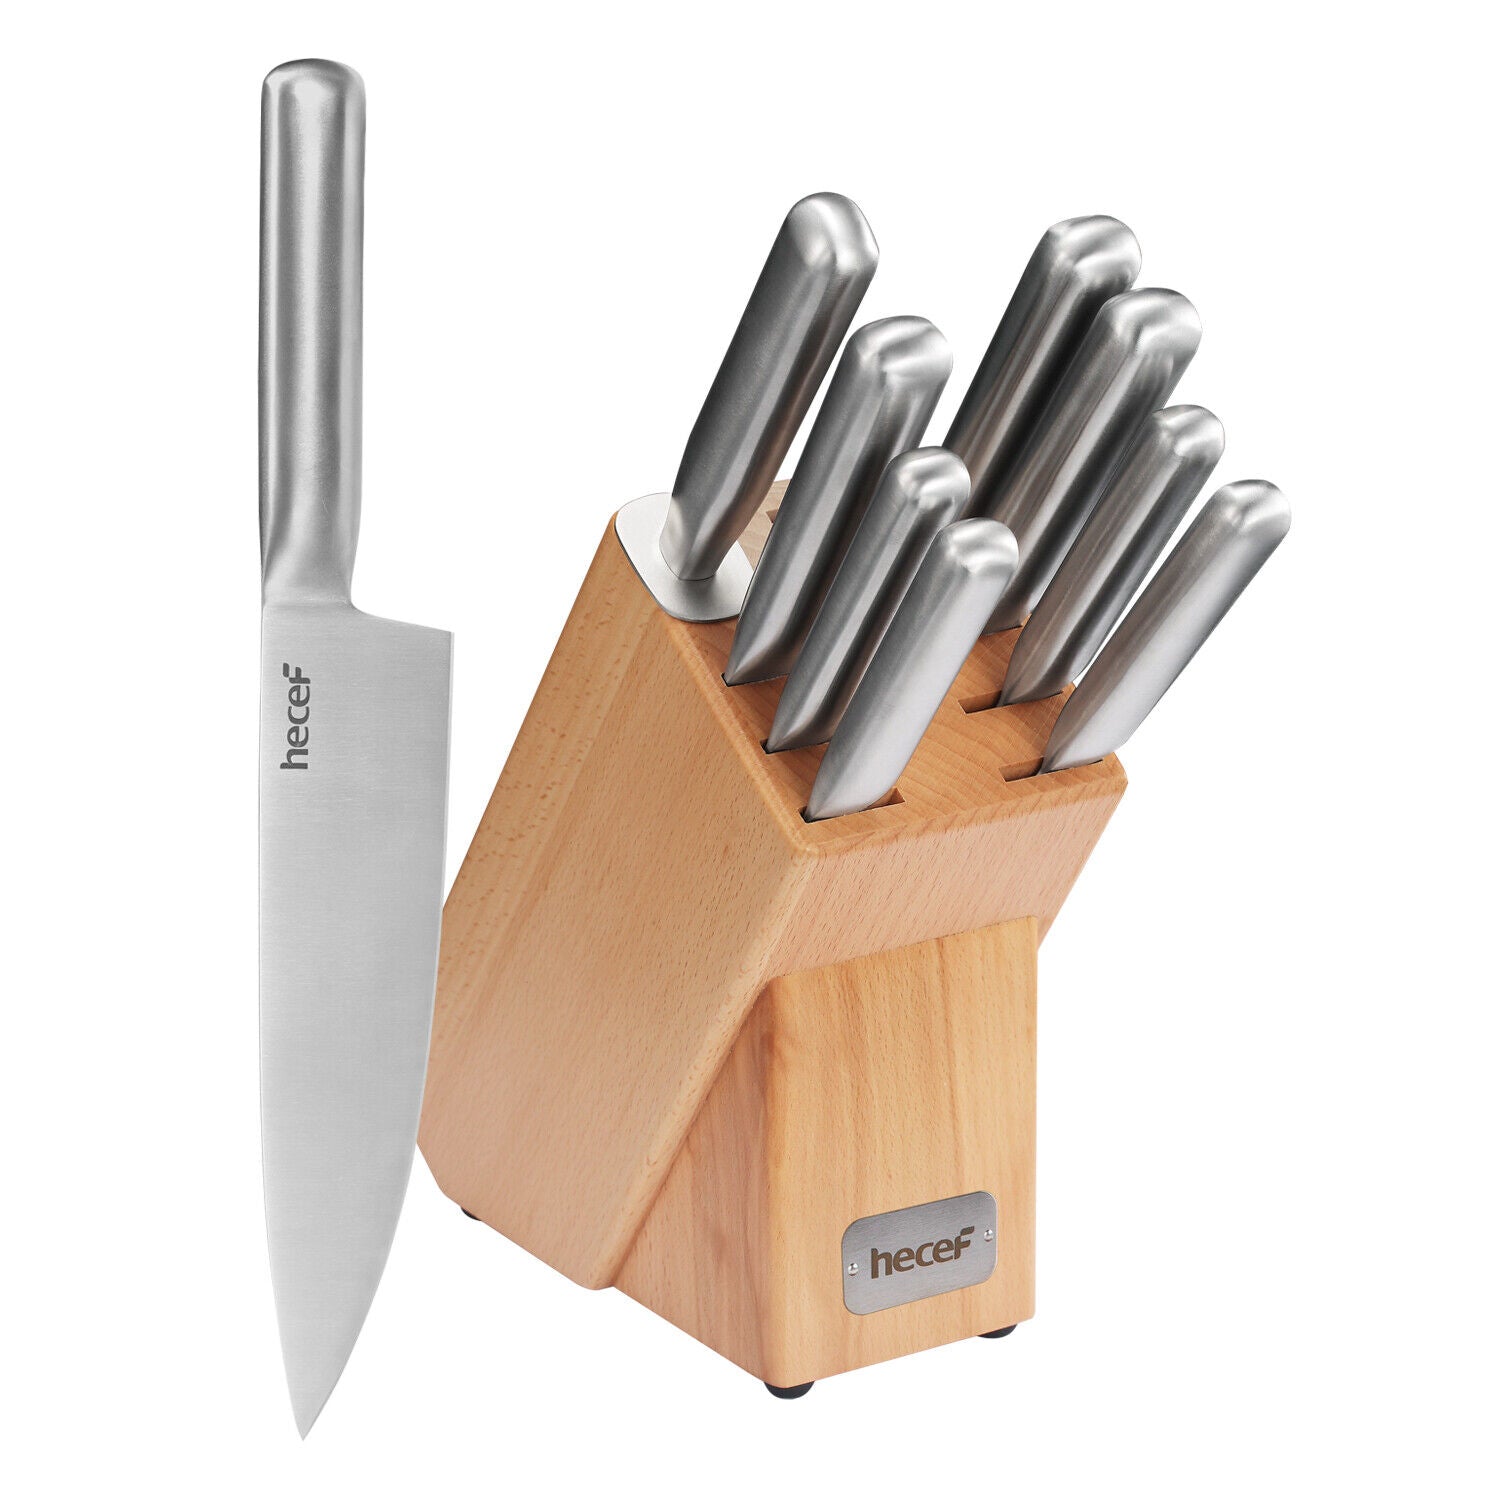 Hecef Silver Kitchen knife set of 5, Satin Finish Blade with Hollow Ha – Hecef  Kitchen